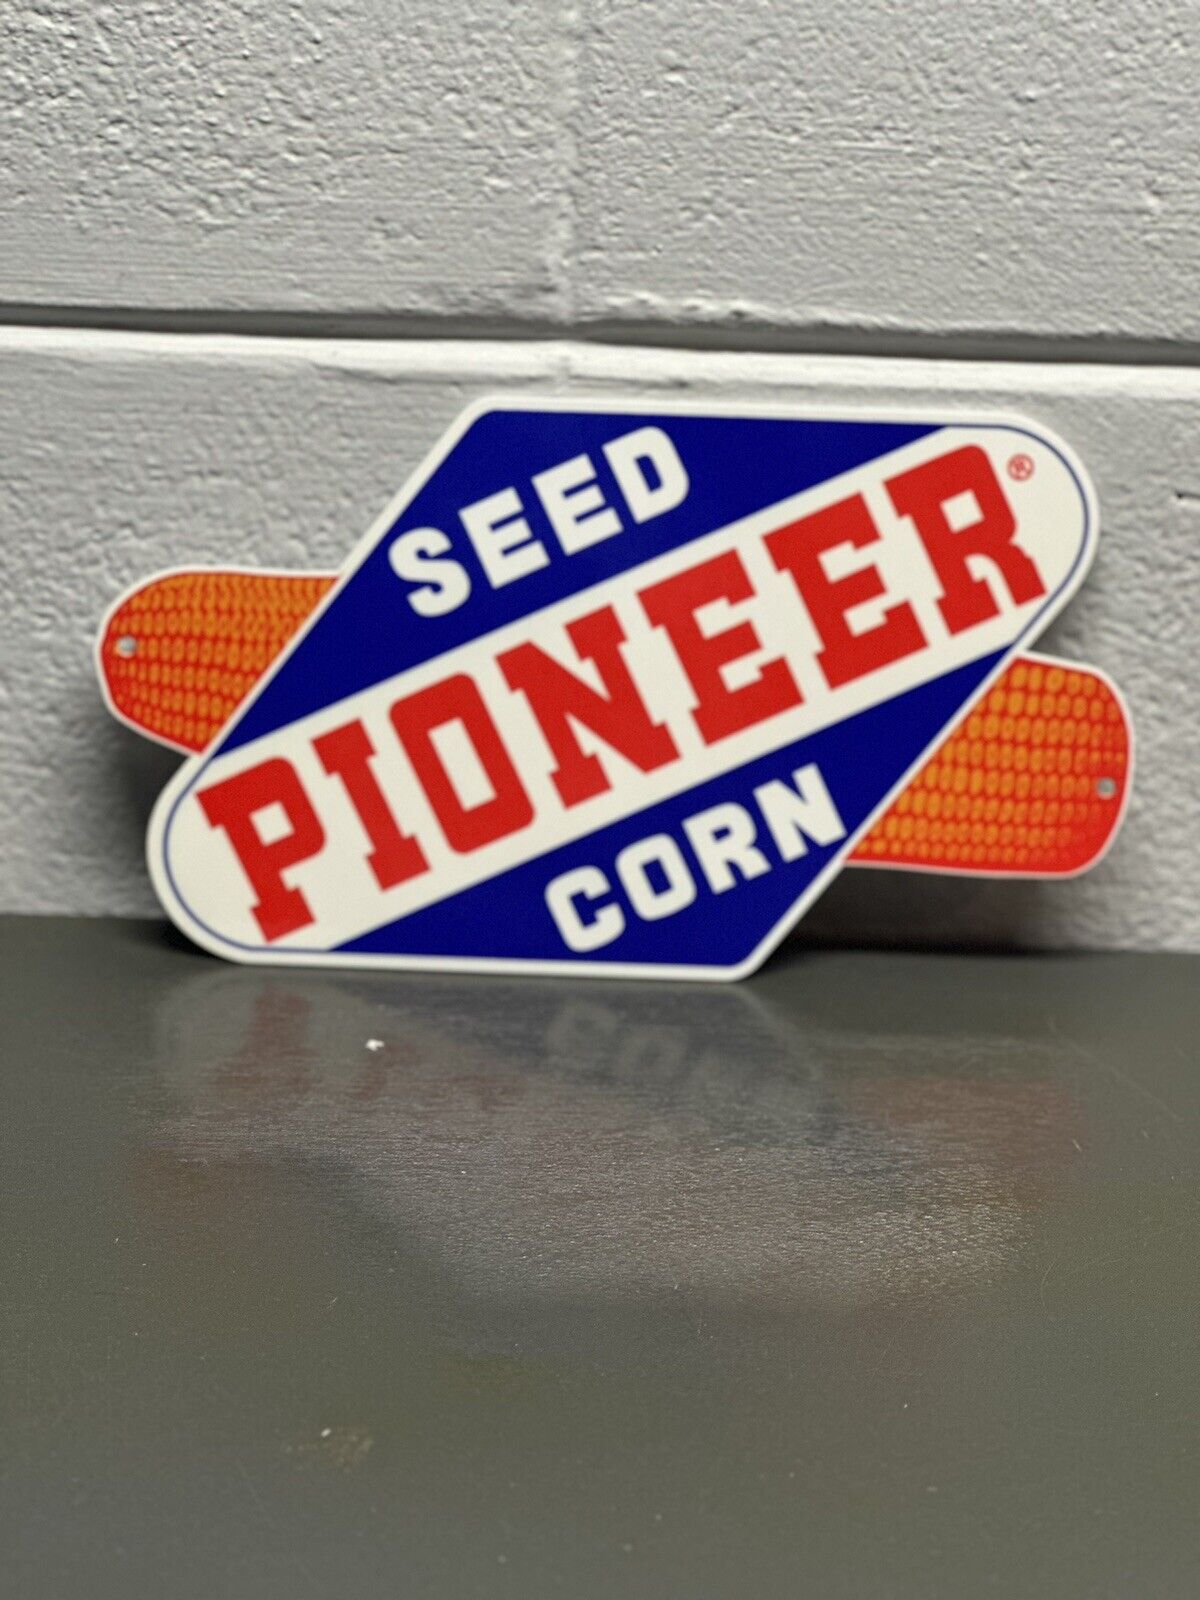 PIONEER Seed Corn Metal Sign Farm Feed Agriculture Gas Oil Hybrid Quality Cob